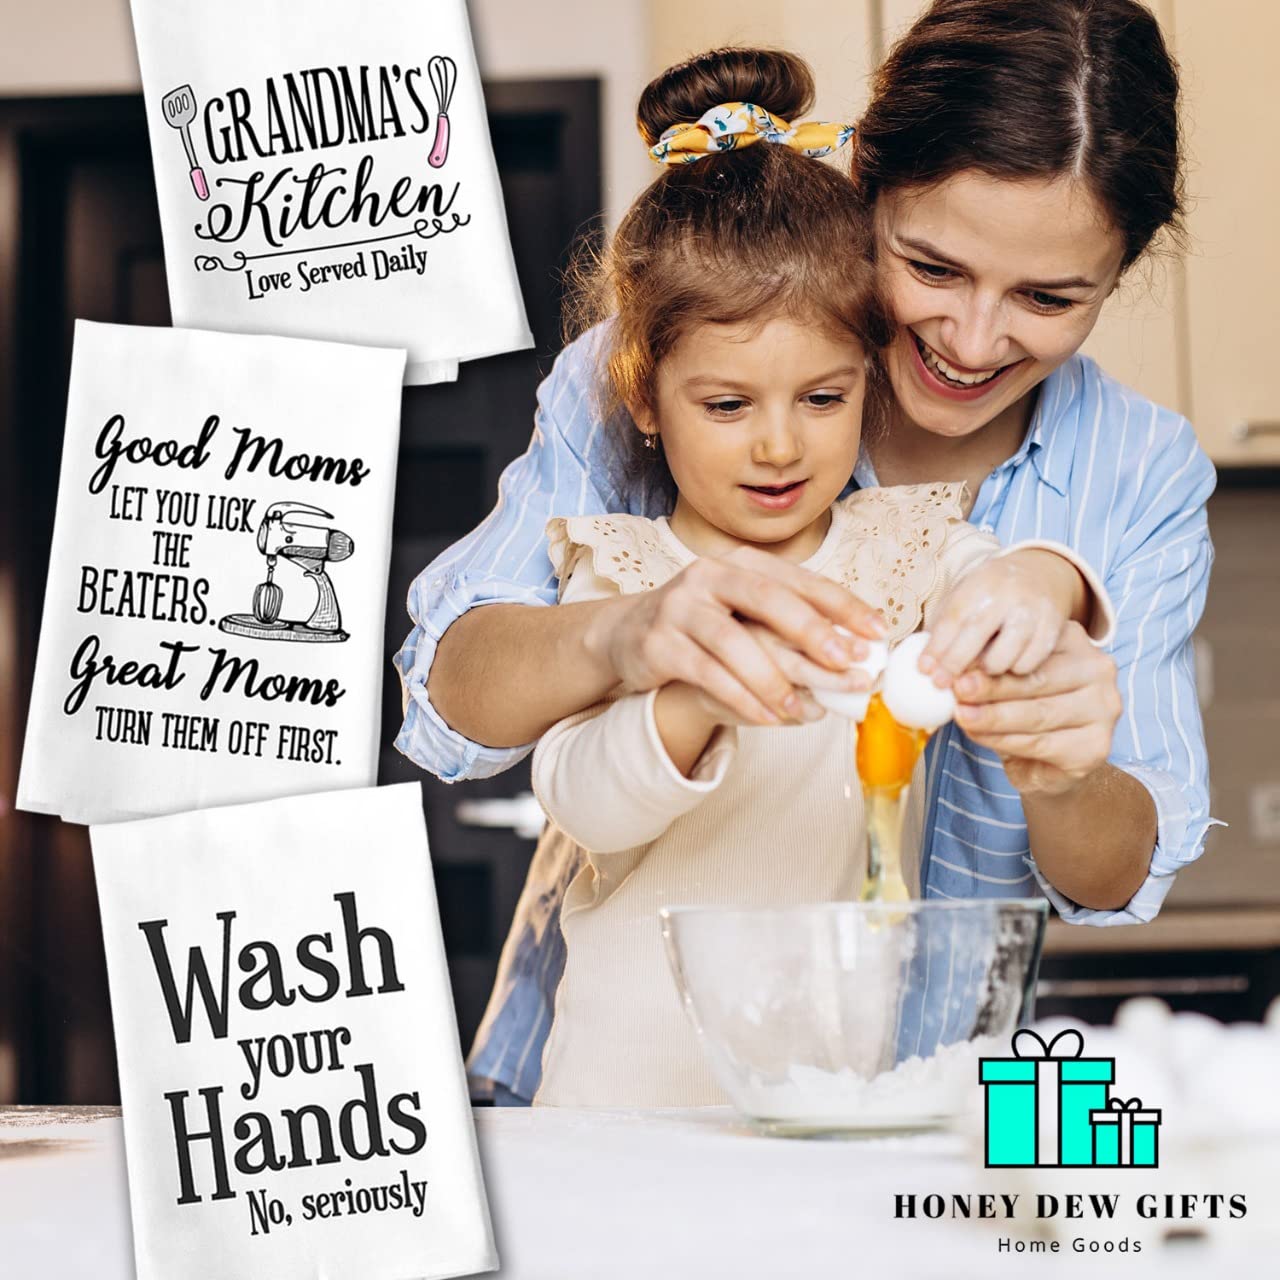 Honey Dew Gifts Funny Kitchen Towels, My Kitchen was Clean Last Week Sorry You Missed it Flour Sack Towel, 27 inch by 27 inch, 100% Cotton, Highly Absorbent, Multi-Purpose Kitchen Dish Towel